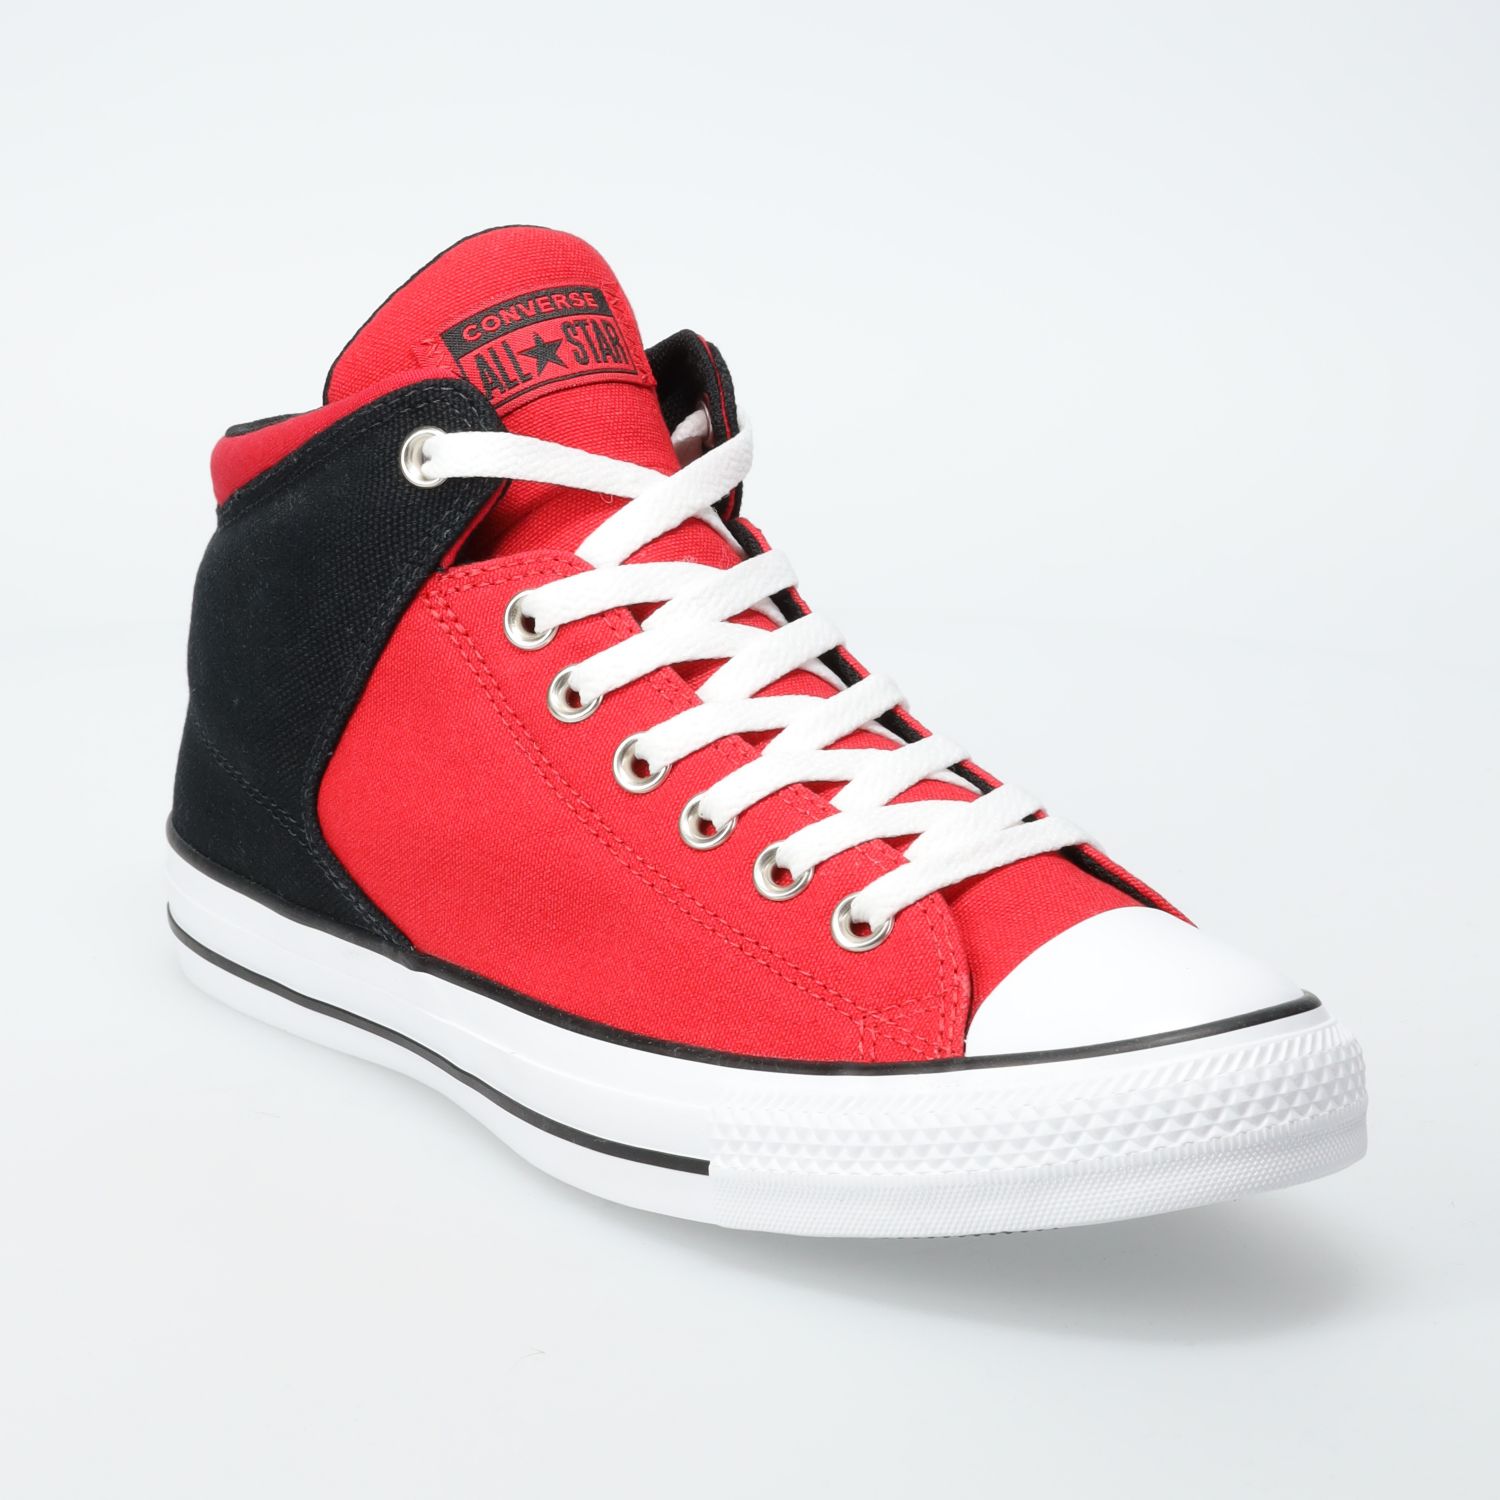 red converse mens size 12